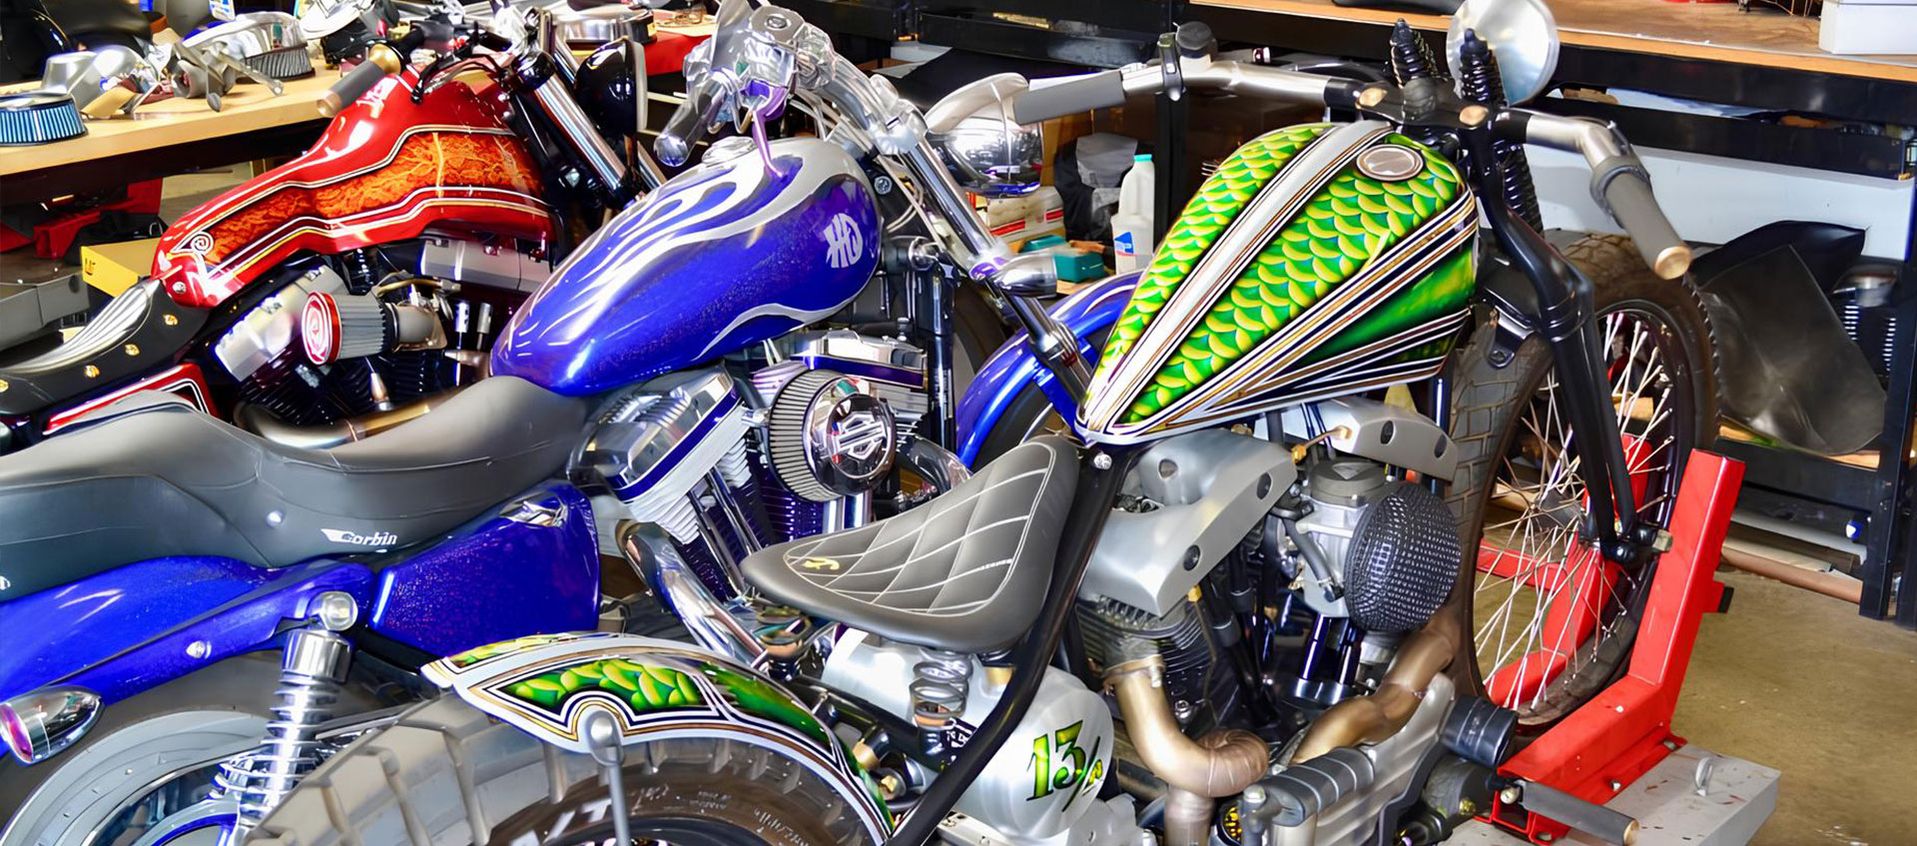 Motorbikes - tuning, colourful